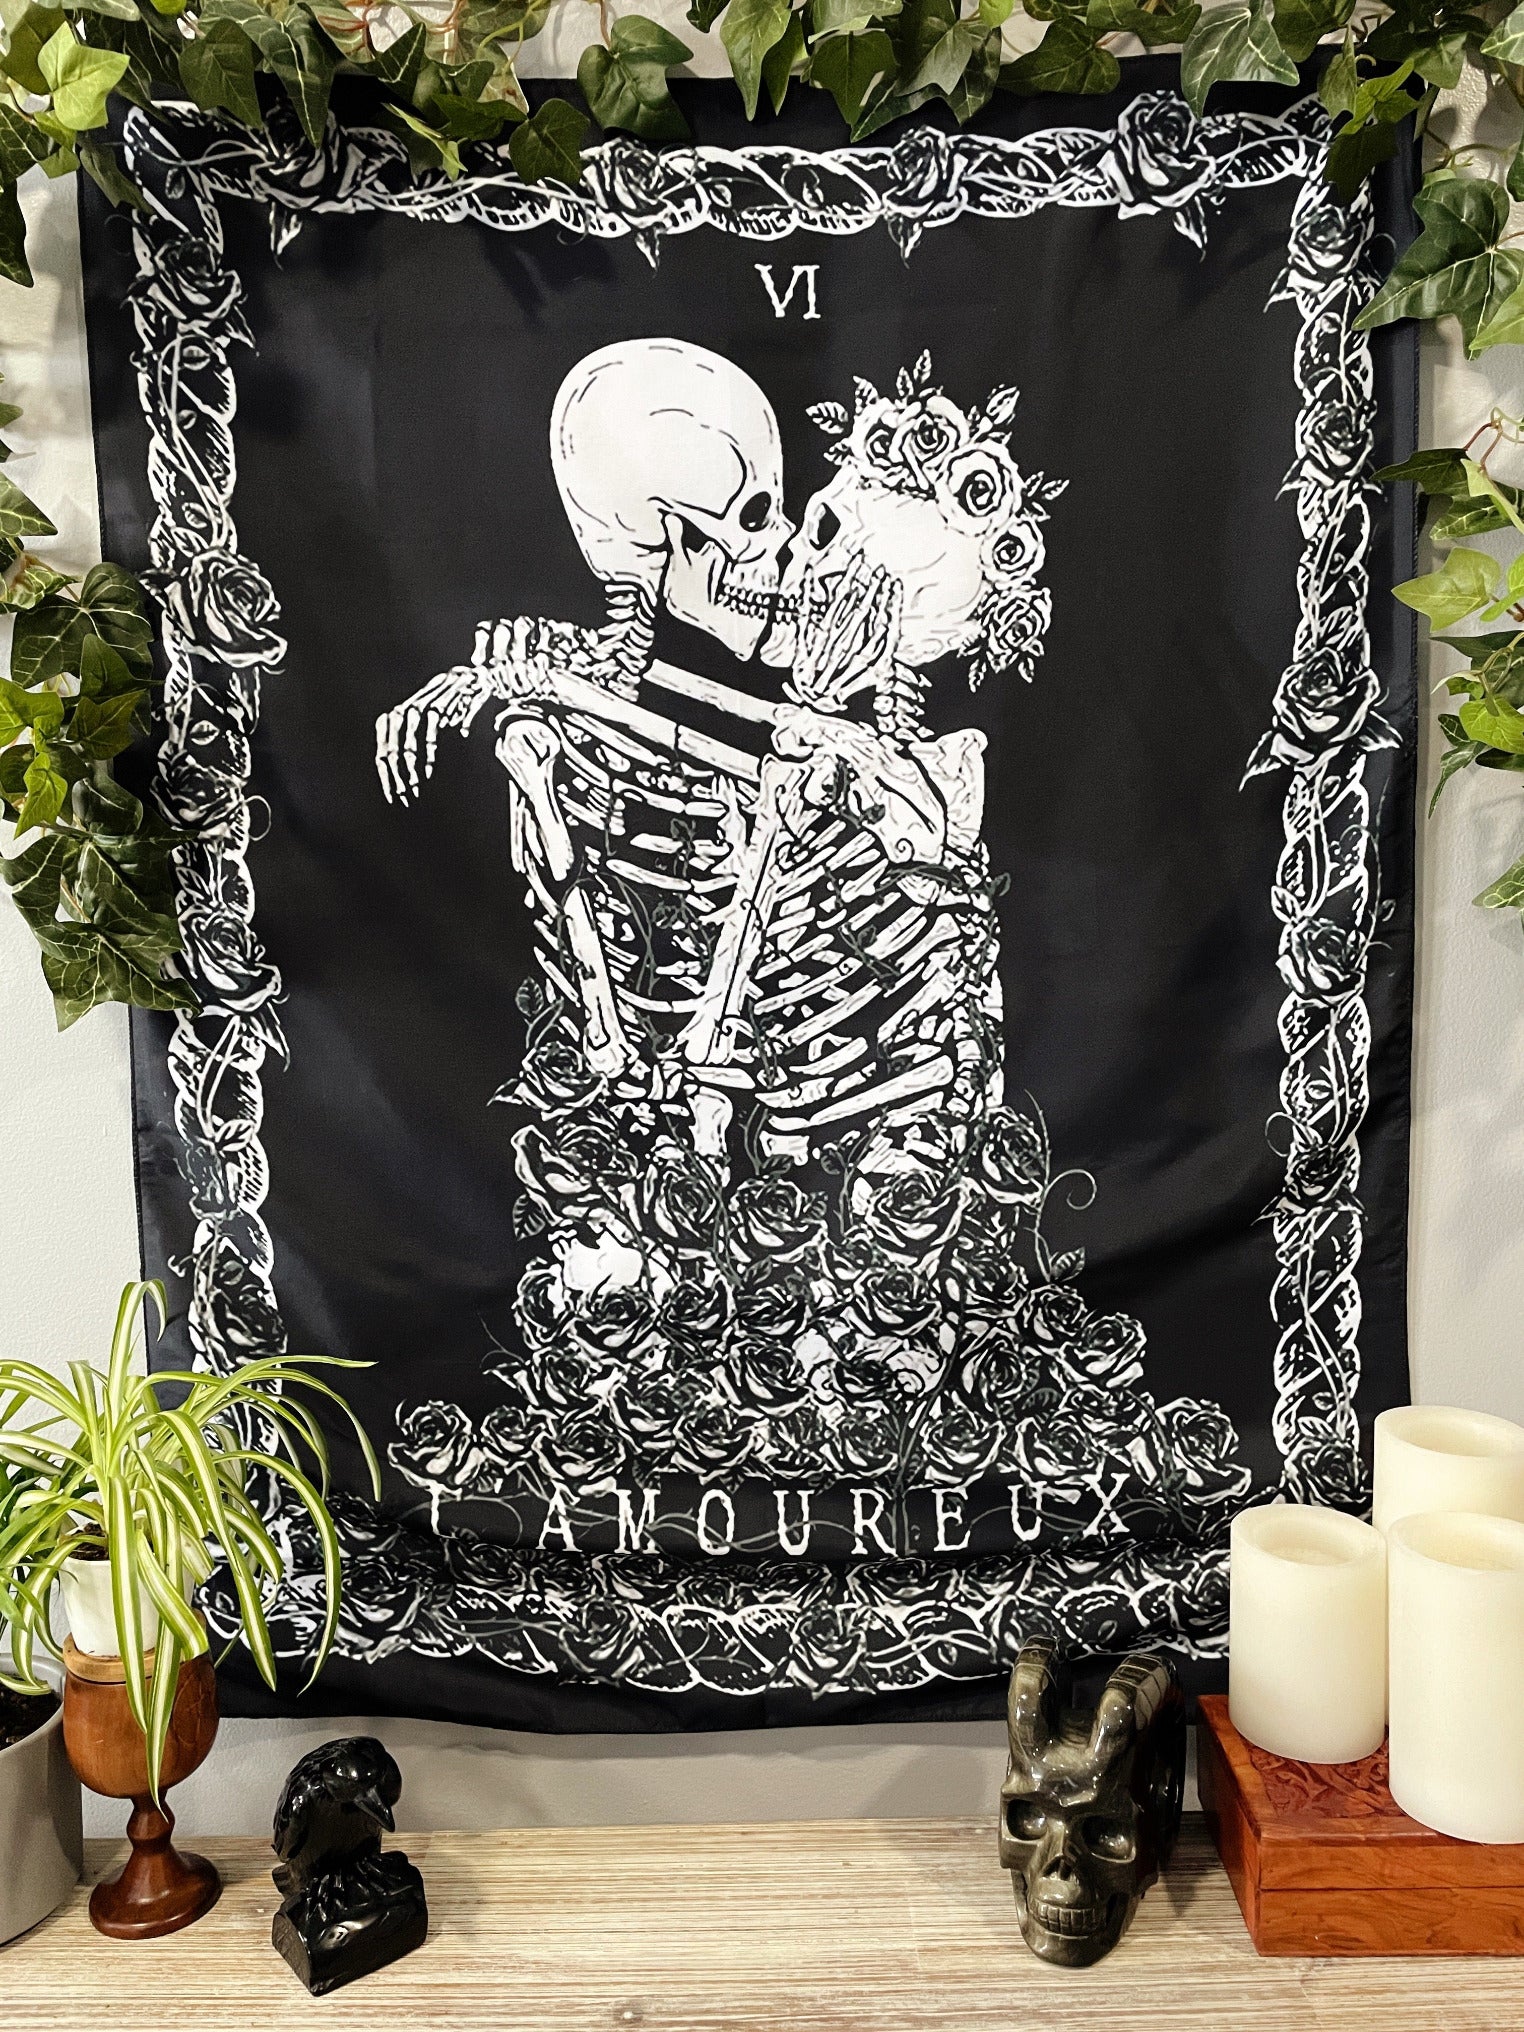 Pictured is a large wall tapestry with a black background and two skeletons kissing on a tarot card "the lovers" printed in white on it.